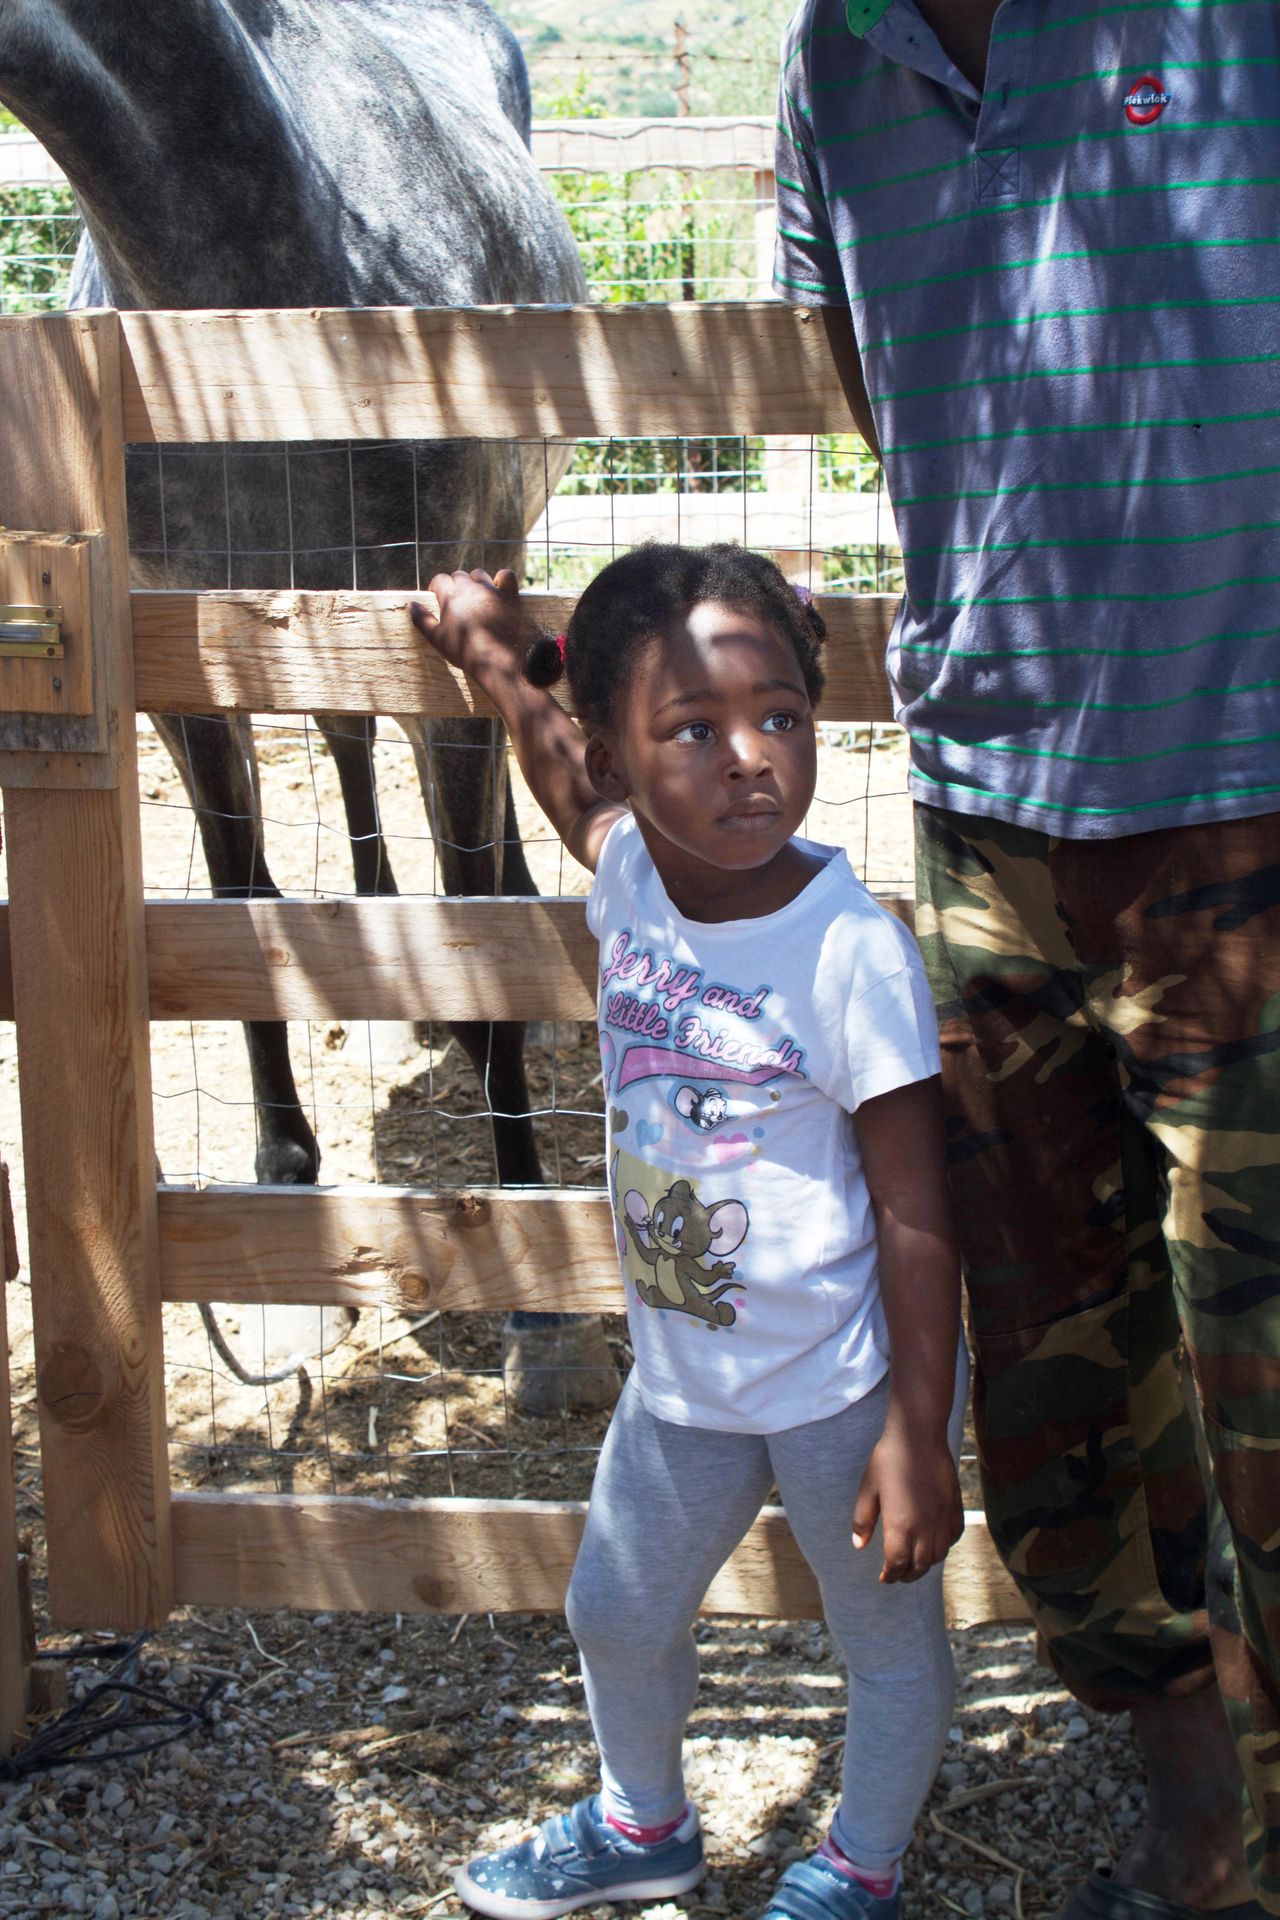 Prospery Sesay, 3, hangs out on the farm while her dad sells produce he picked in the Palermo market.